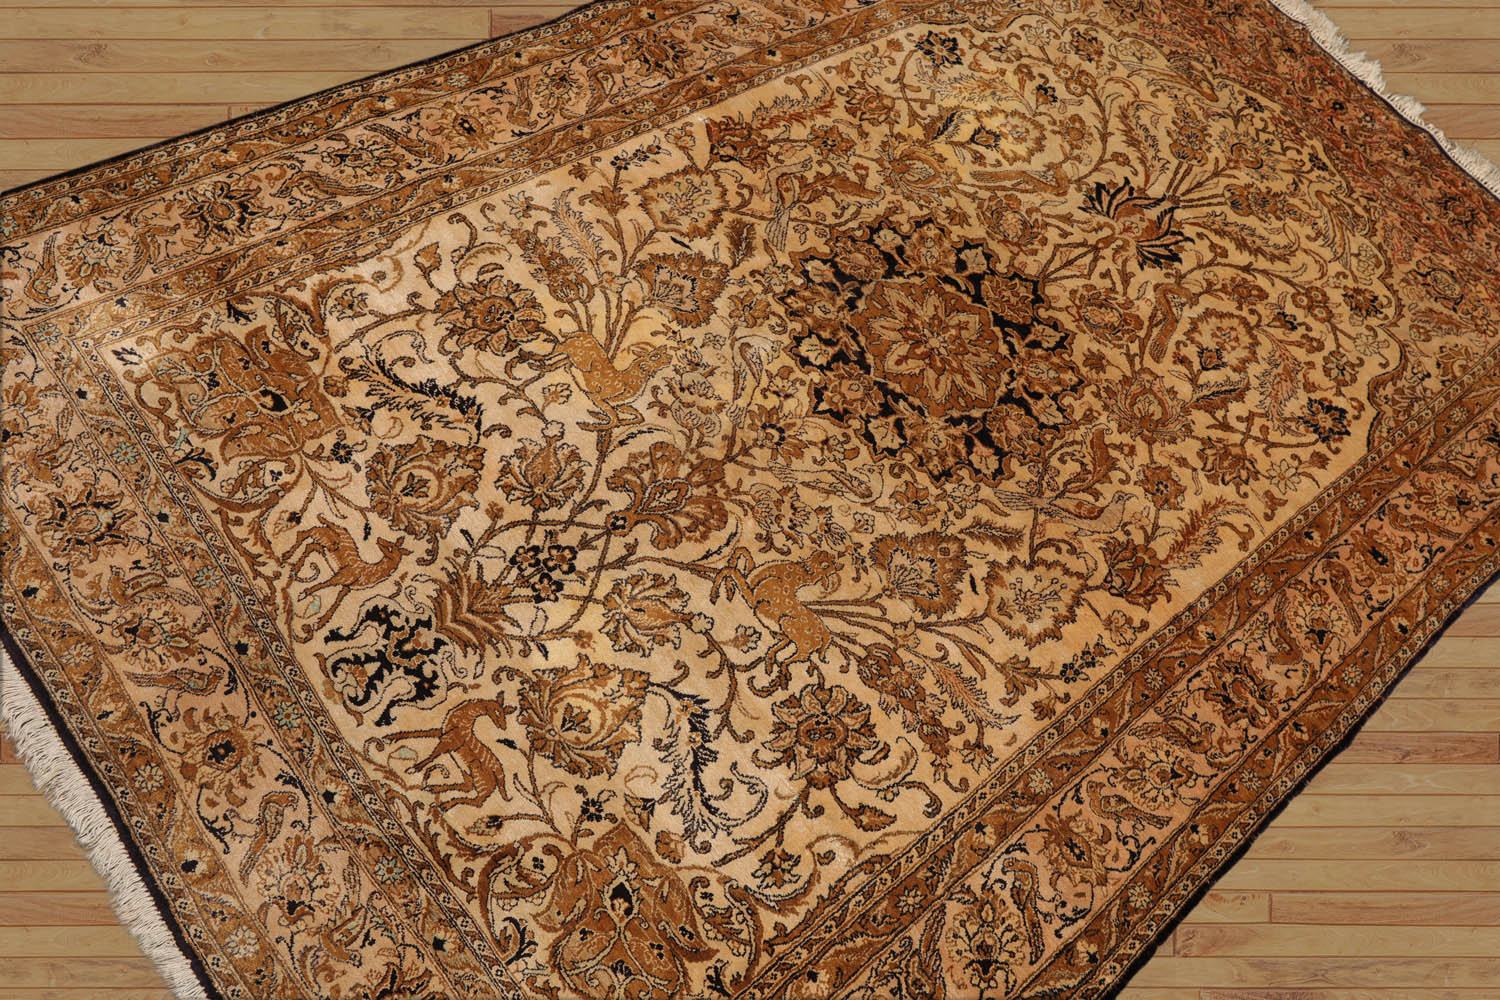 Nastia 5x7 Hand Knotted Persian 100% Silk  Pictorial Kum 200 KPSI Oriental Area Rug Tan,Brown Color